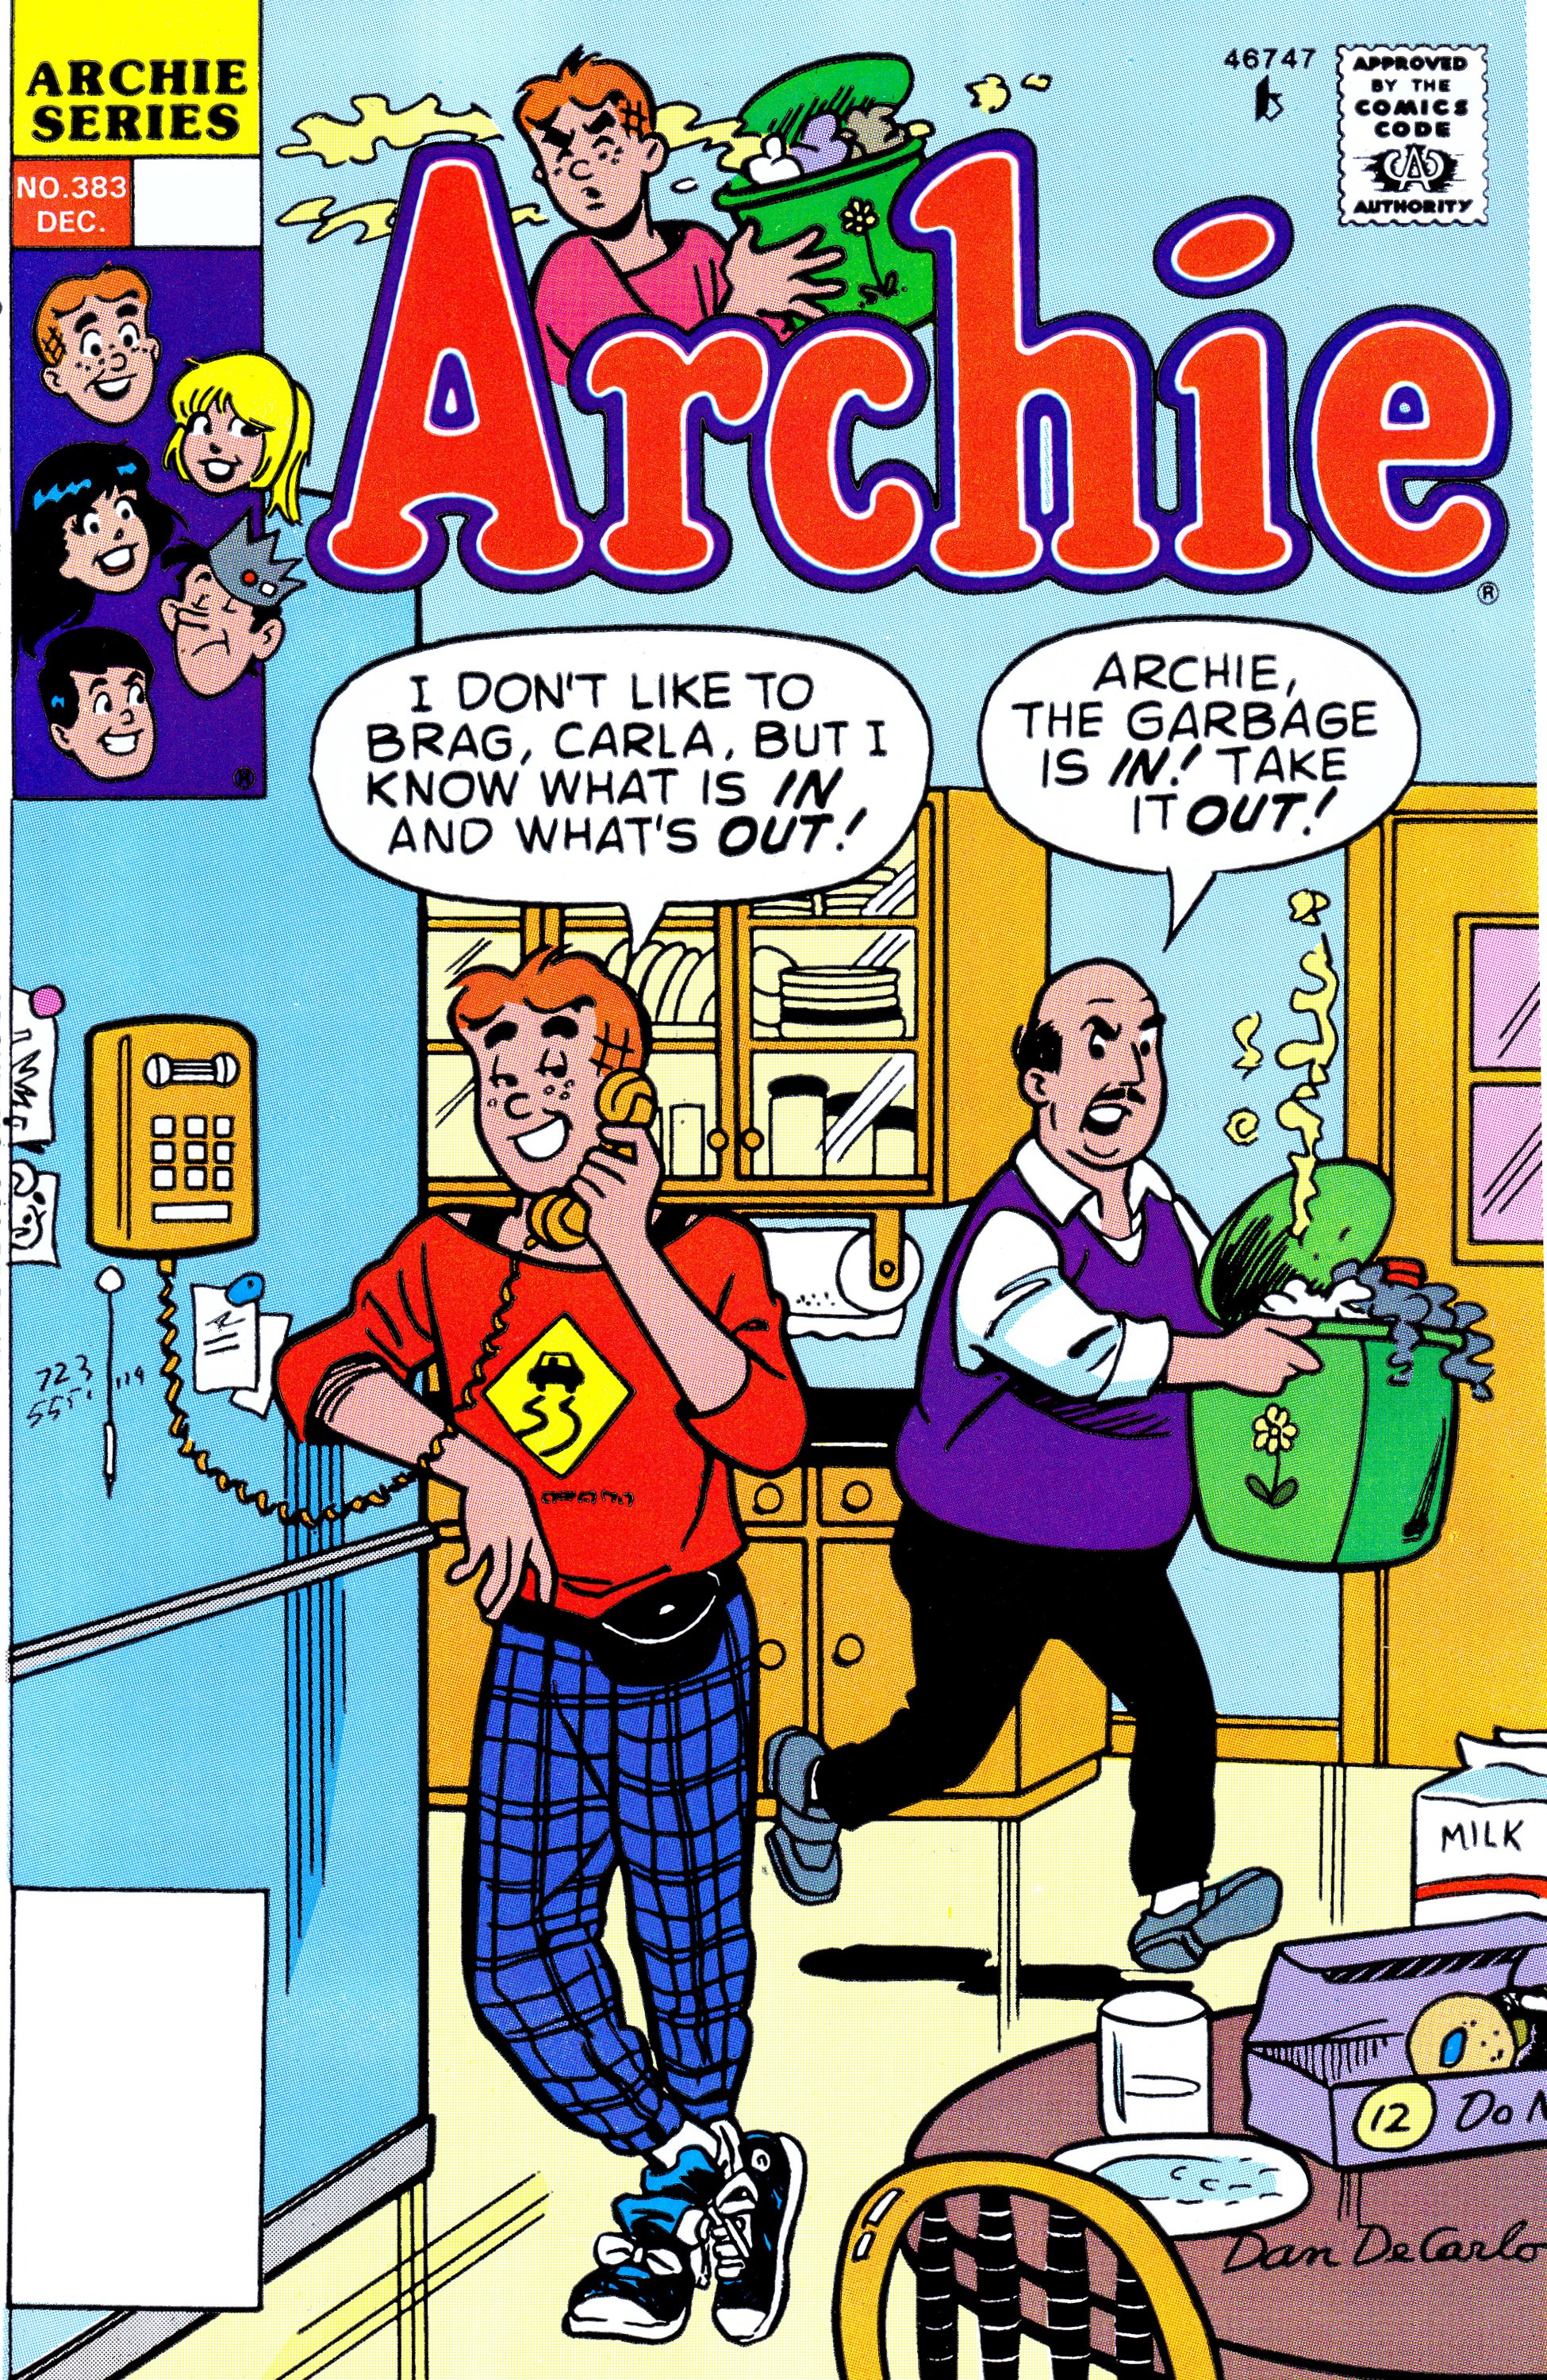 Read online Archie (1960) comic -  Issue #383 - 1